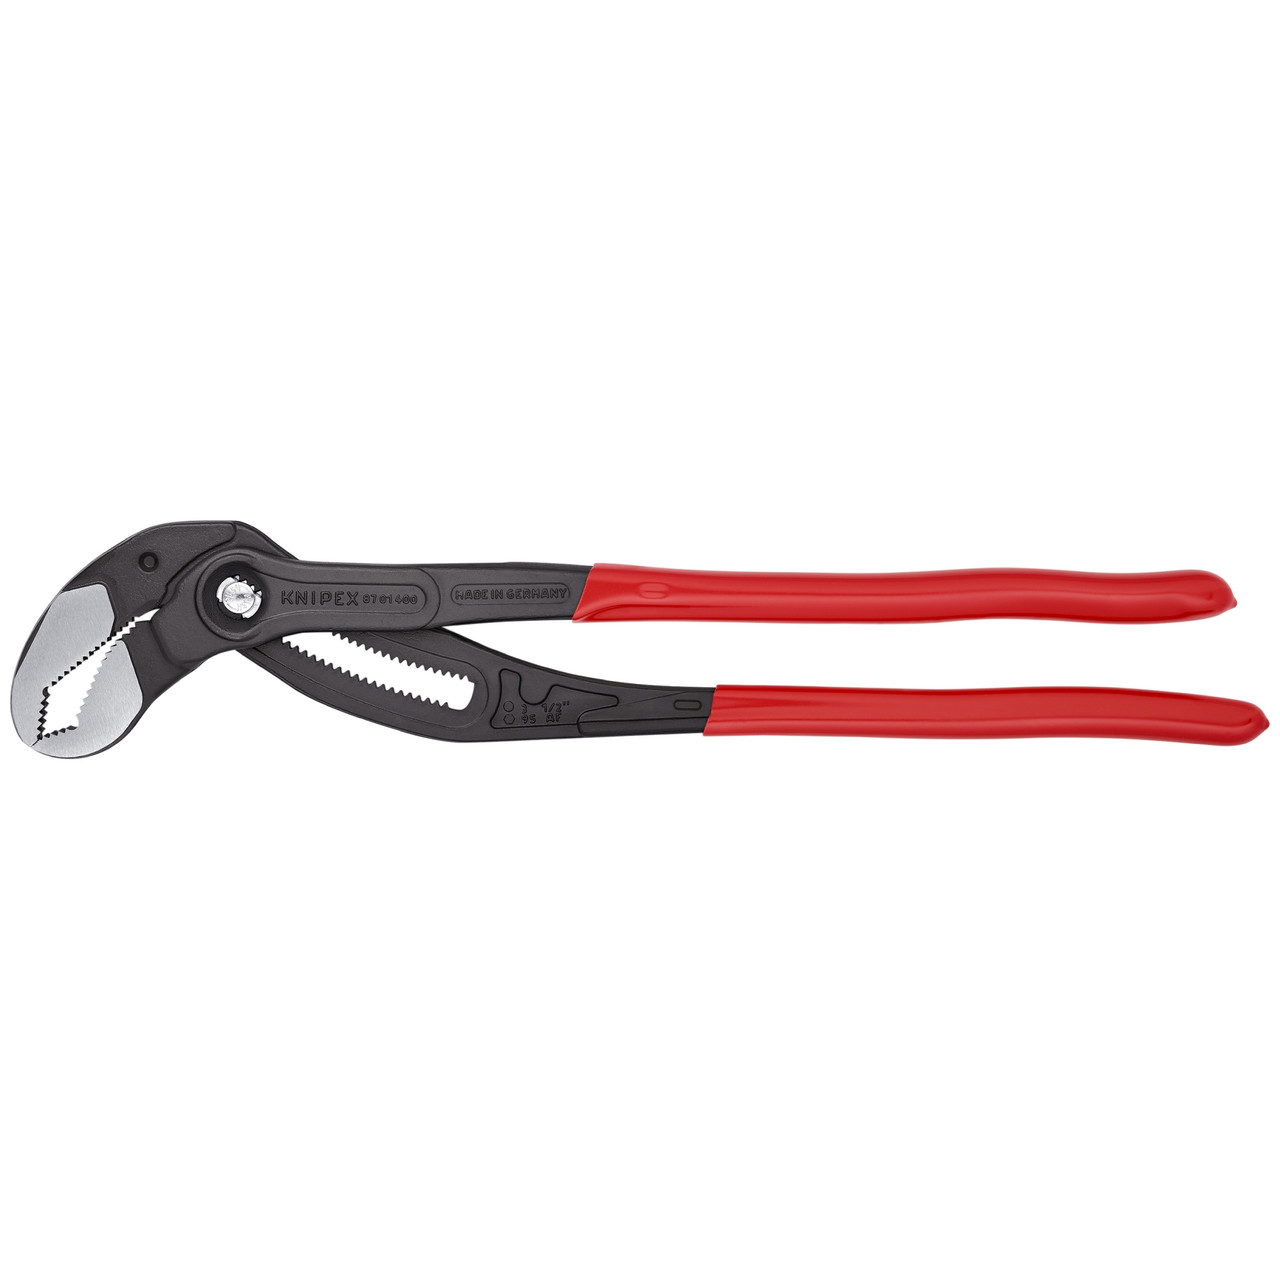 Knipex 87 01 400 SBA 16'' Cobra® Pliers With New Textured Grip -  ChadsToolbox.com Inc